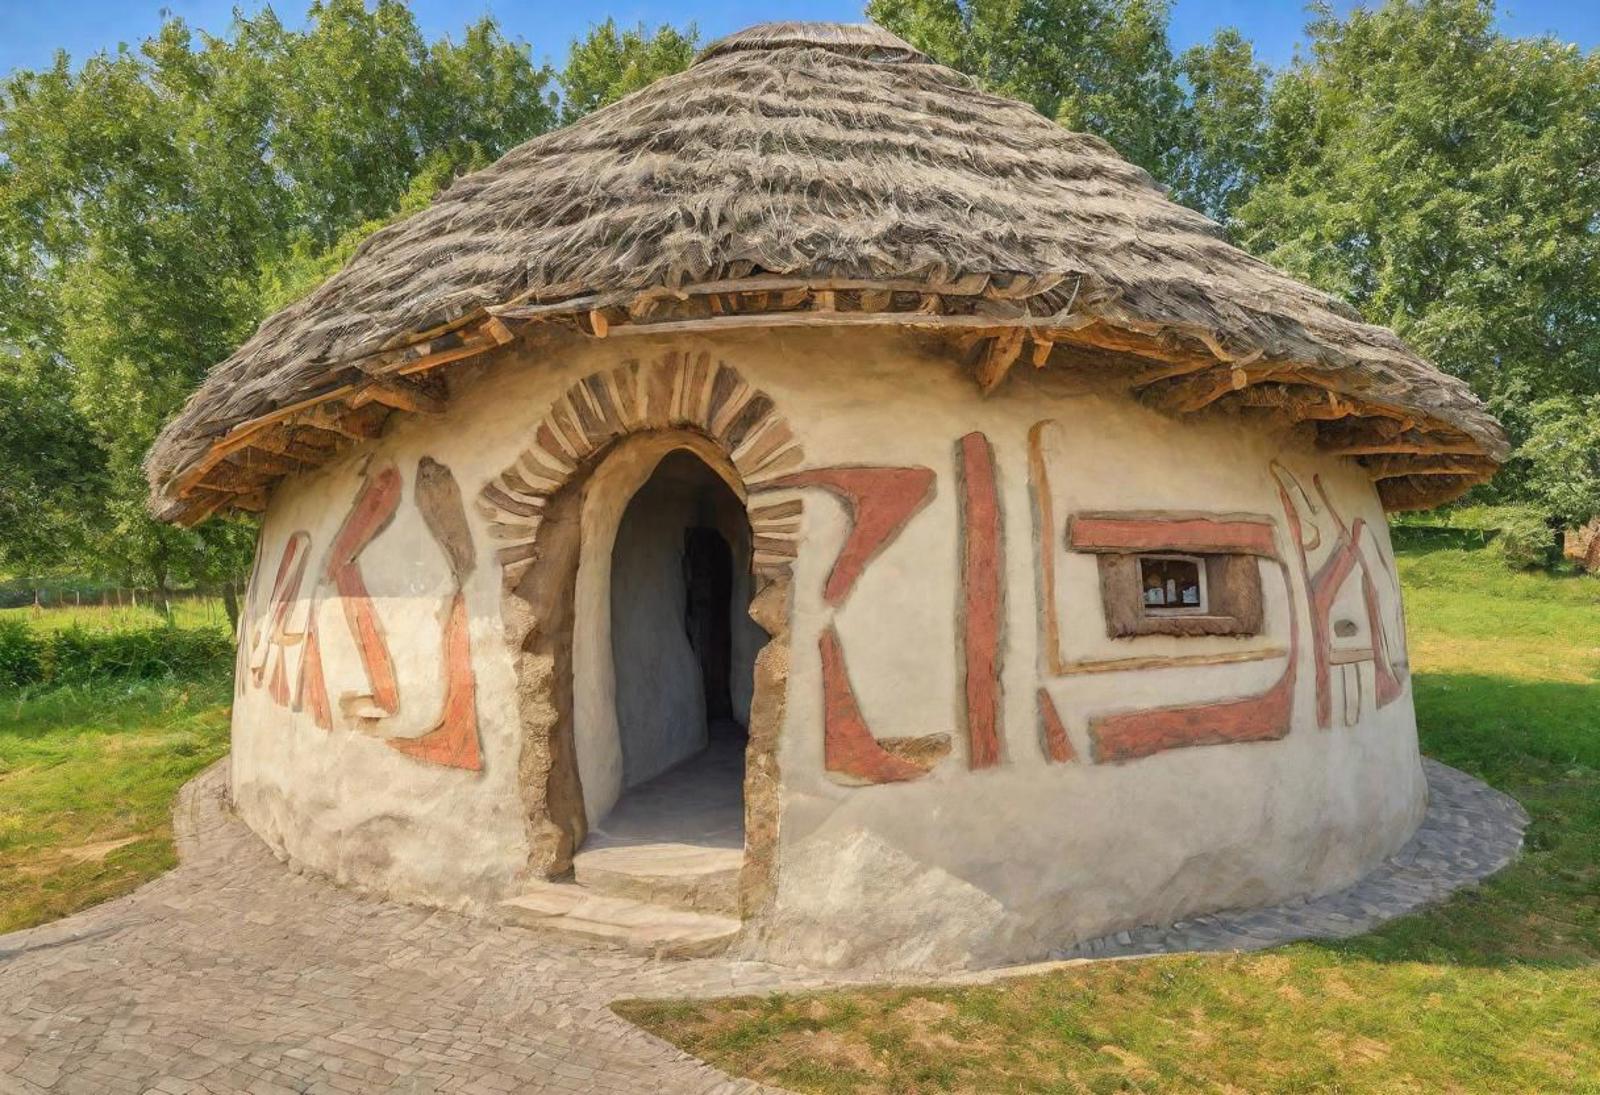 neolithic-houses image by cristianchirita749